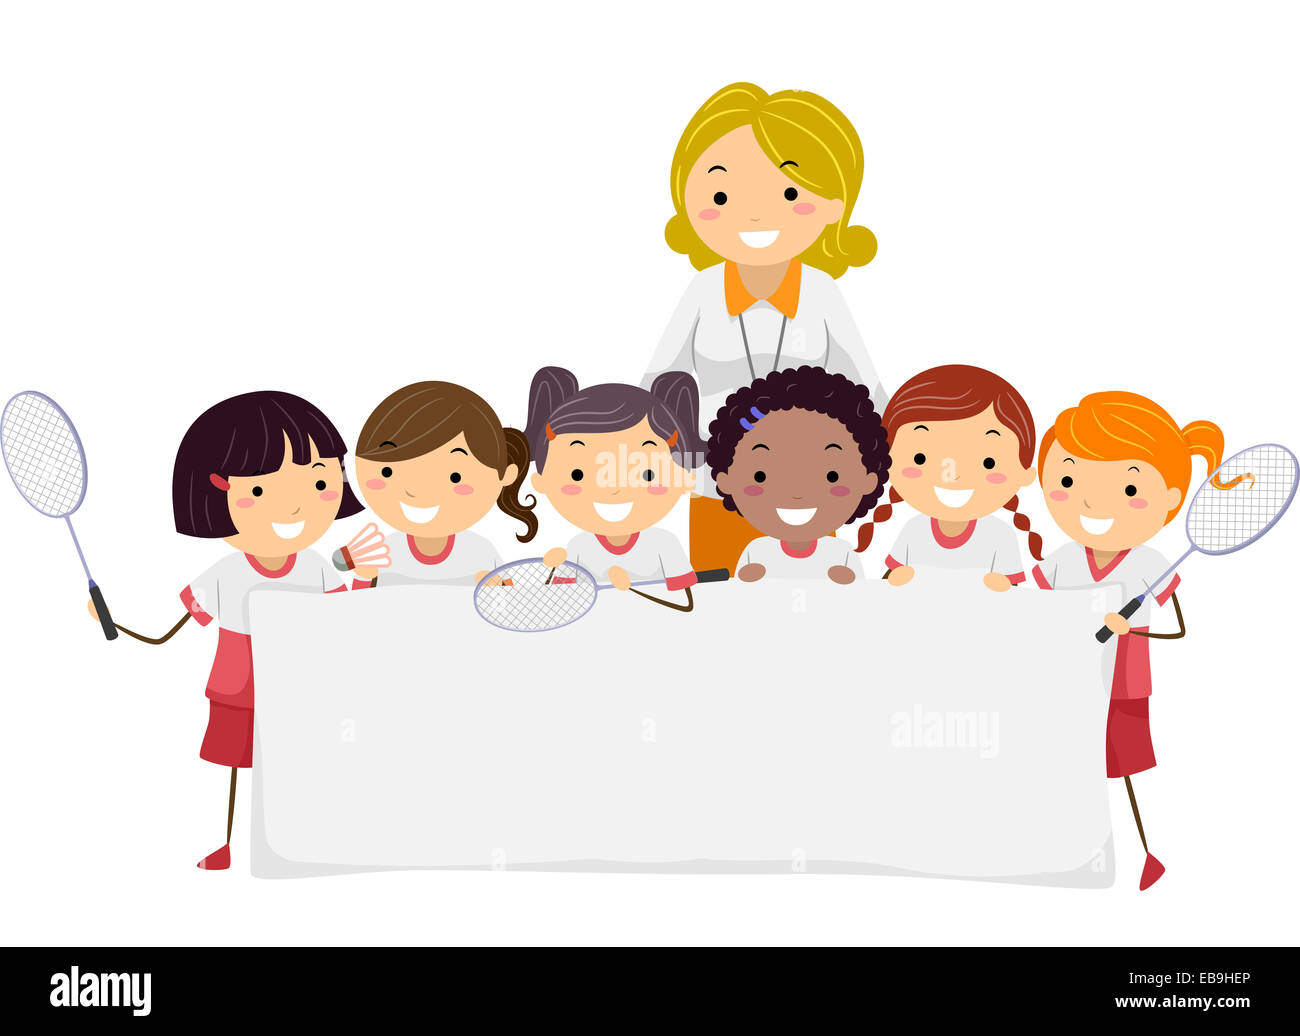 Illustration Featuring a Group of Young Badminton Players Holding a Blank Banner Stock Photo